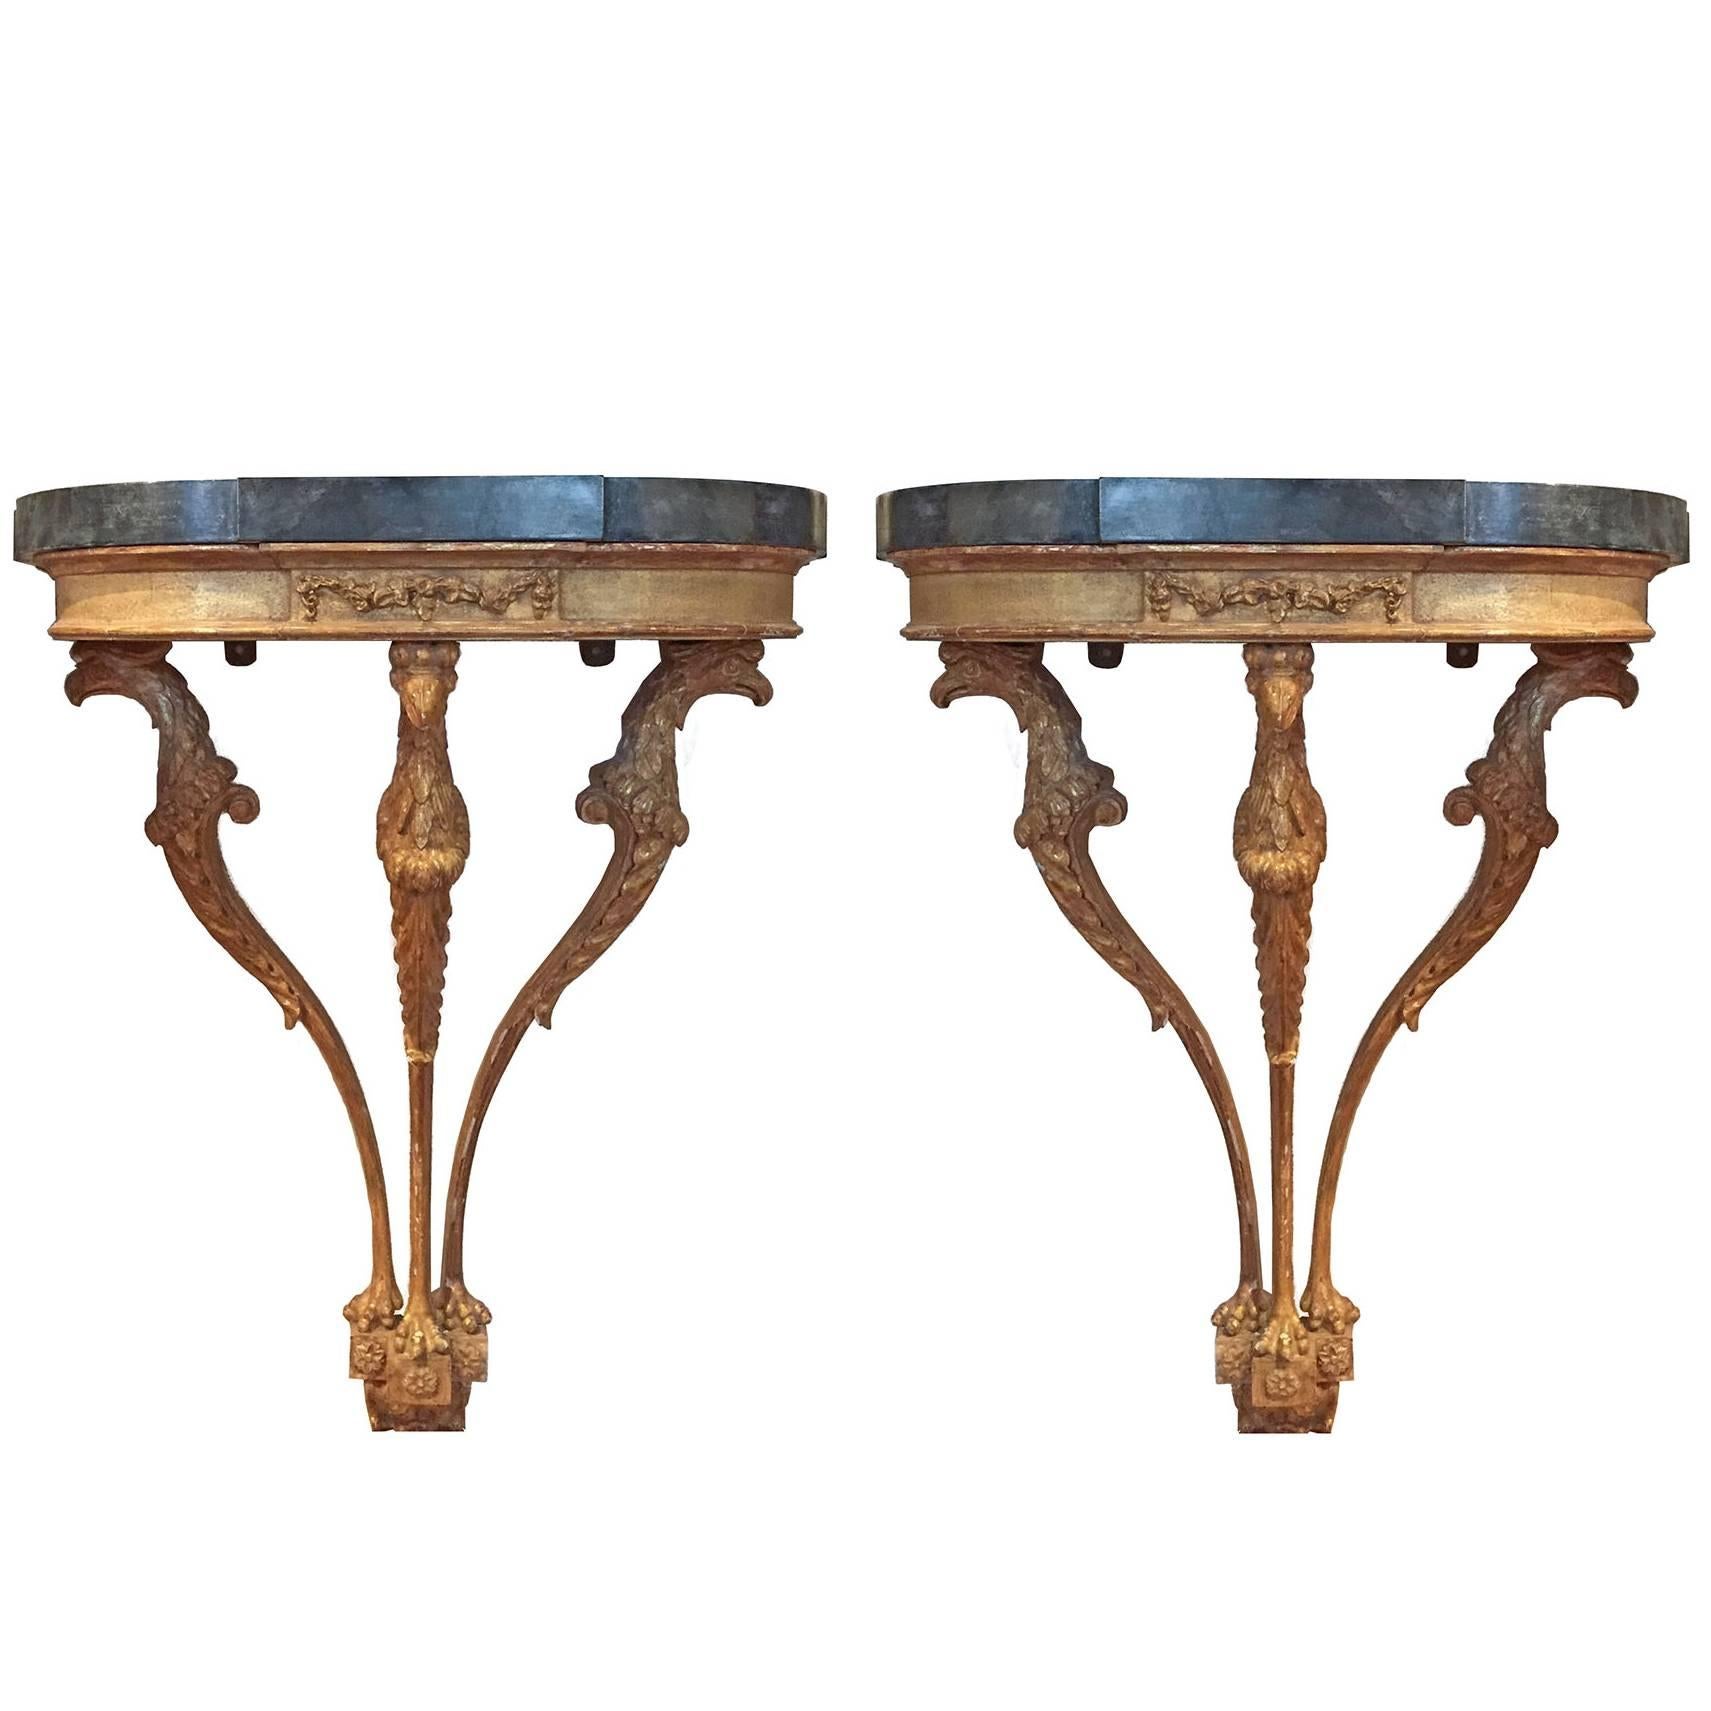 Pair of Adam Inlaid Satinwood and Carved Giltwood Hanging Consoles